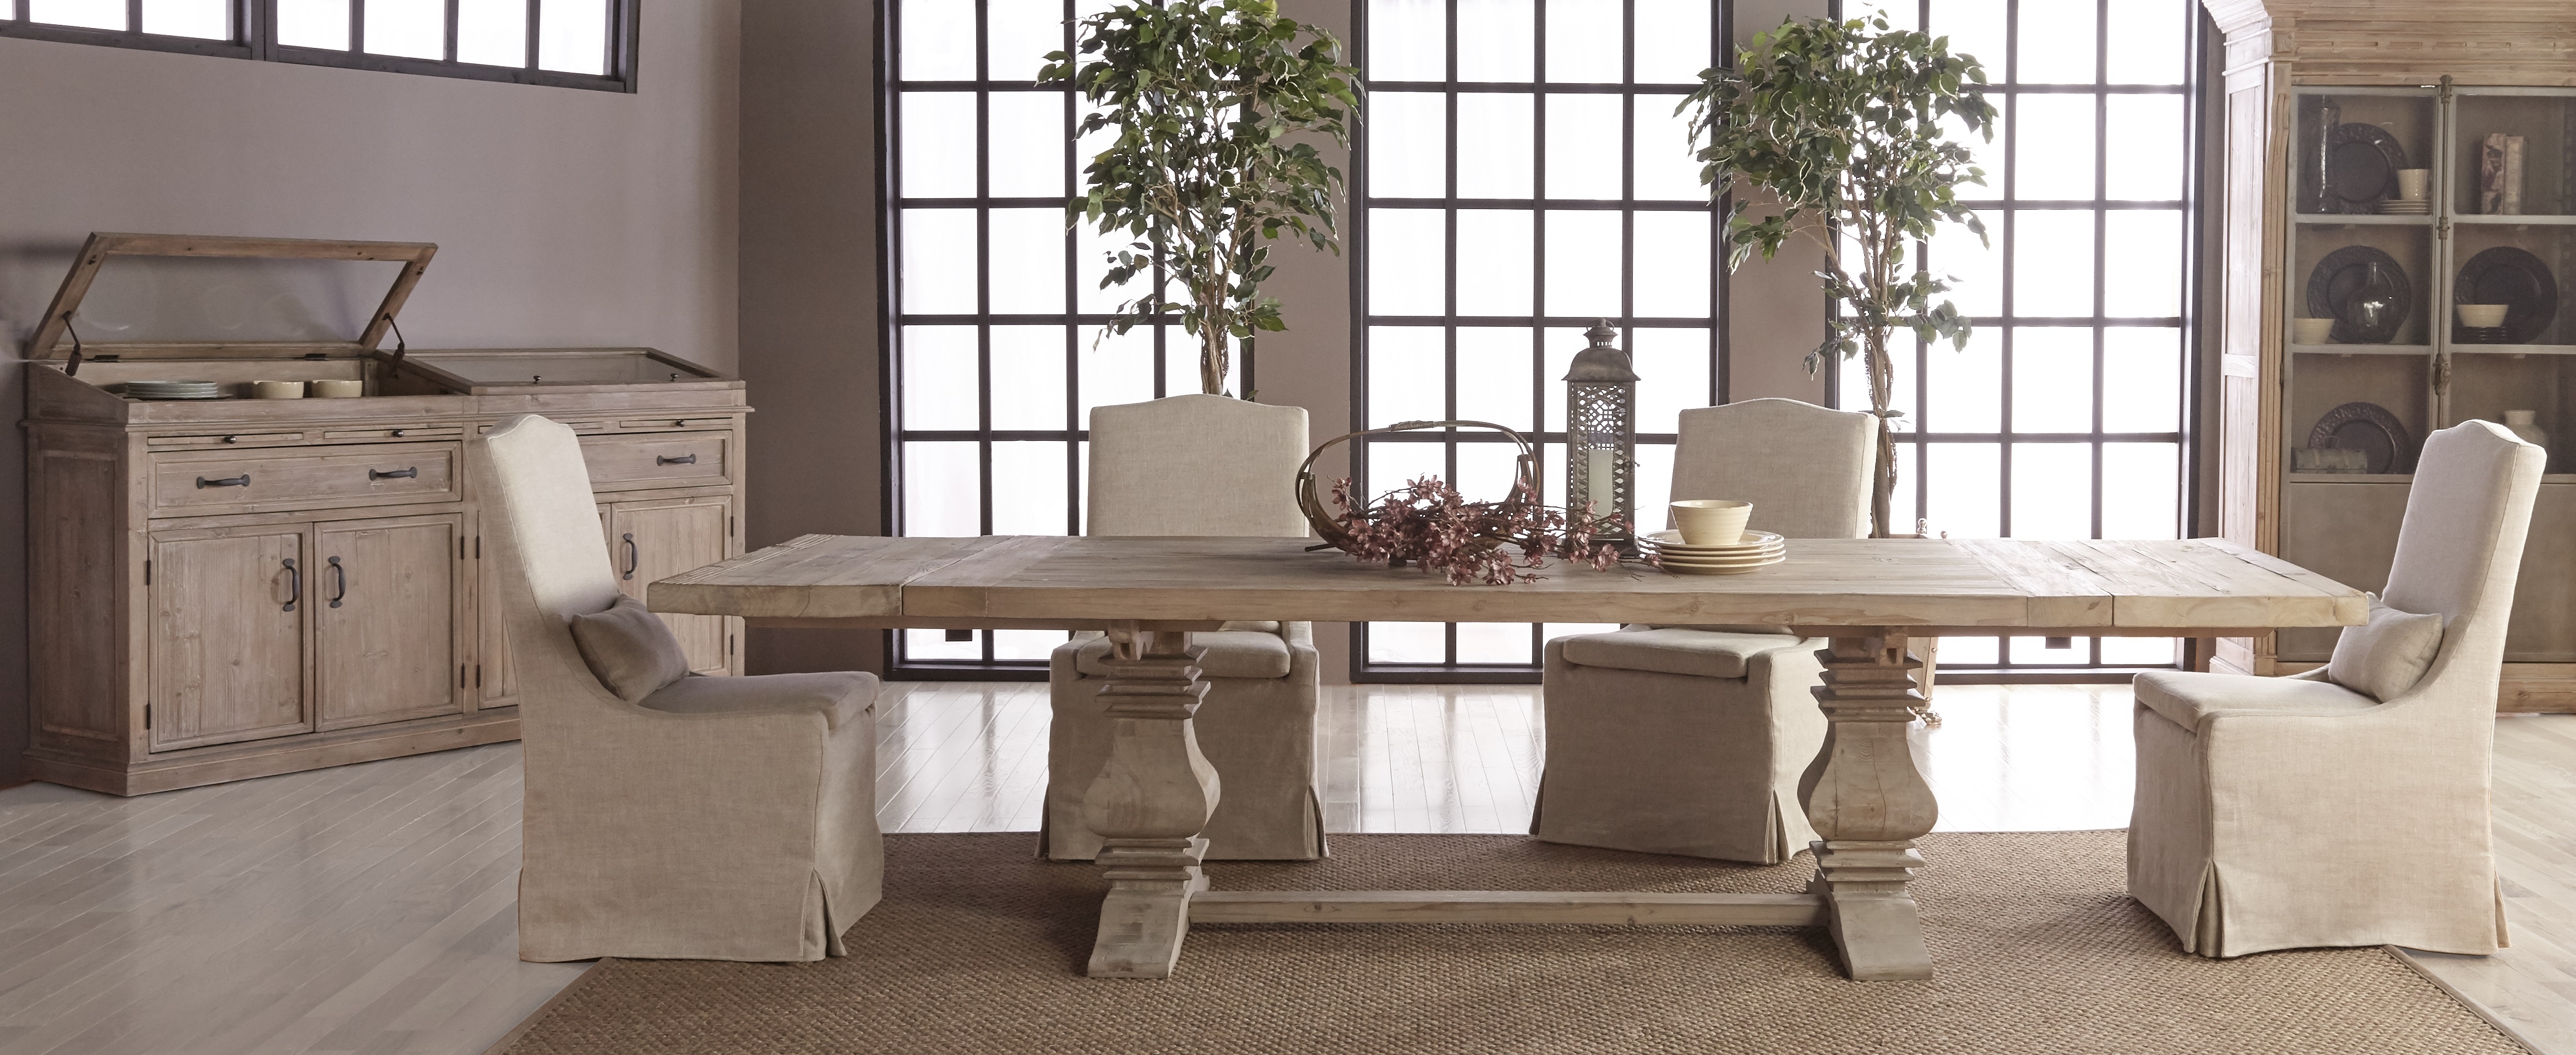 Monastery Extension Dining Table - Image 12